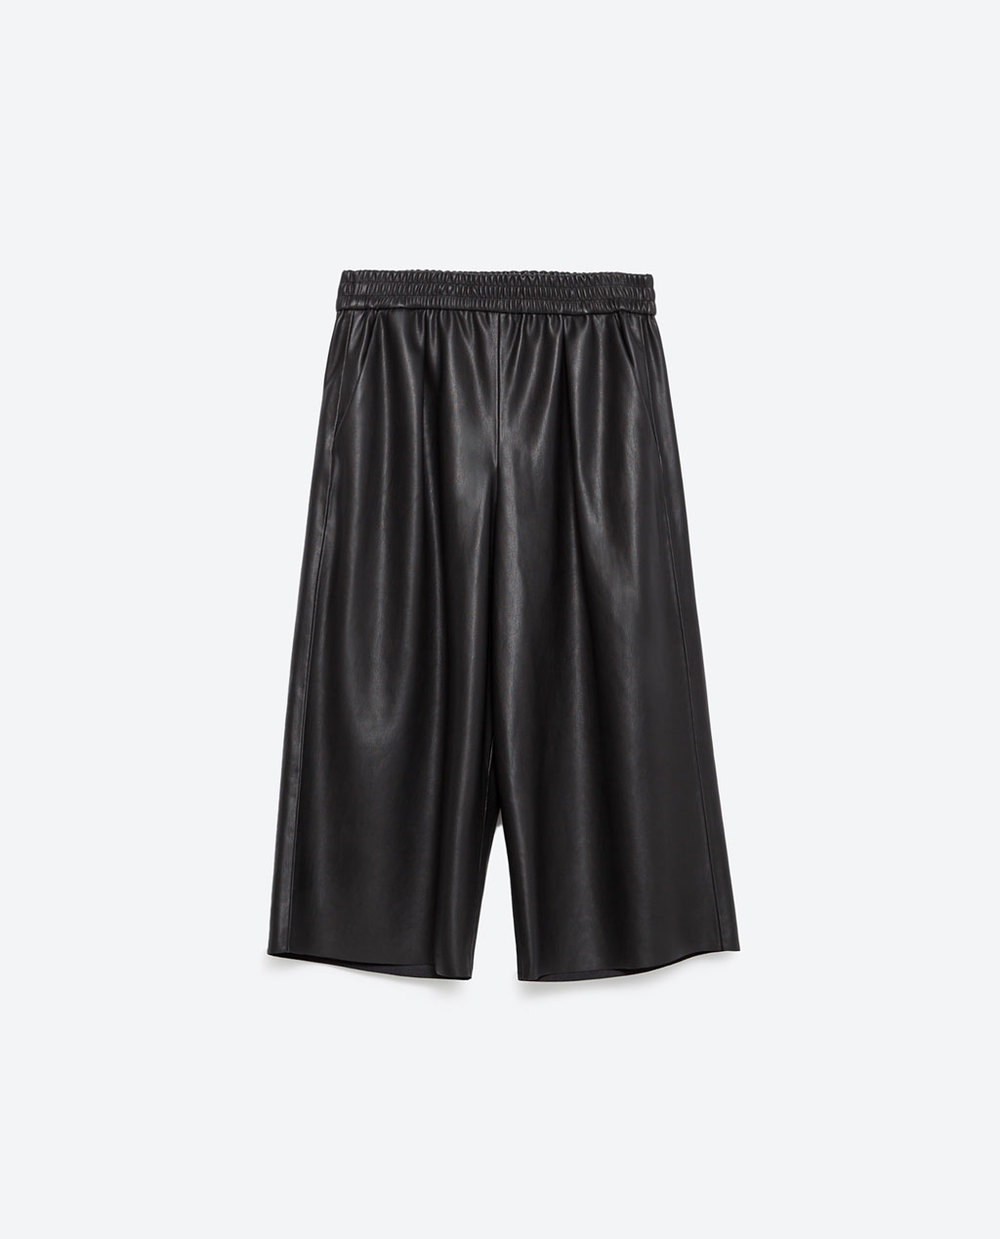  Faux Leather Culottes. Available in two colors. Zara. $39. 